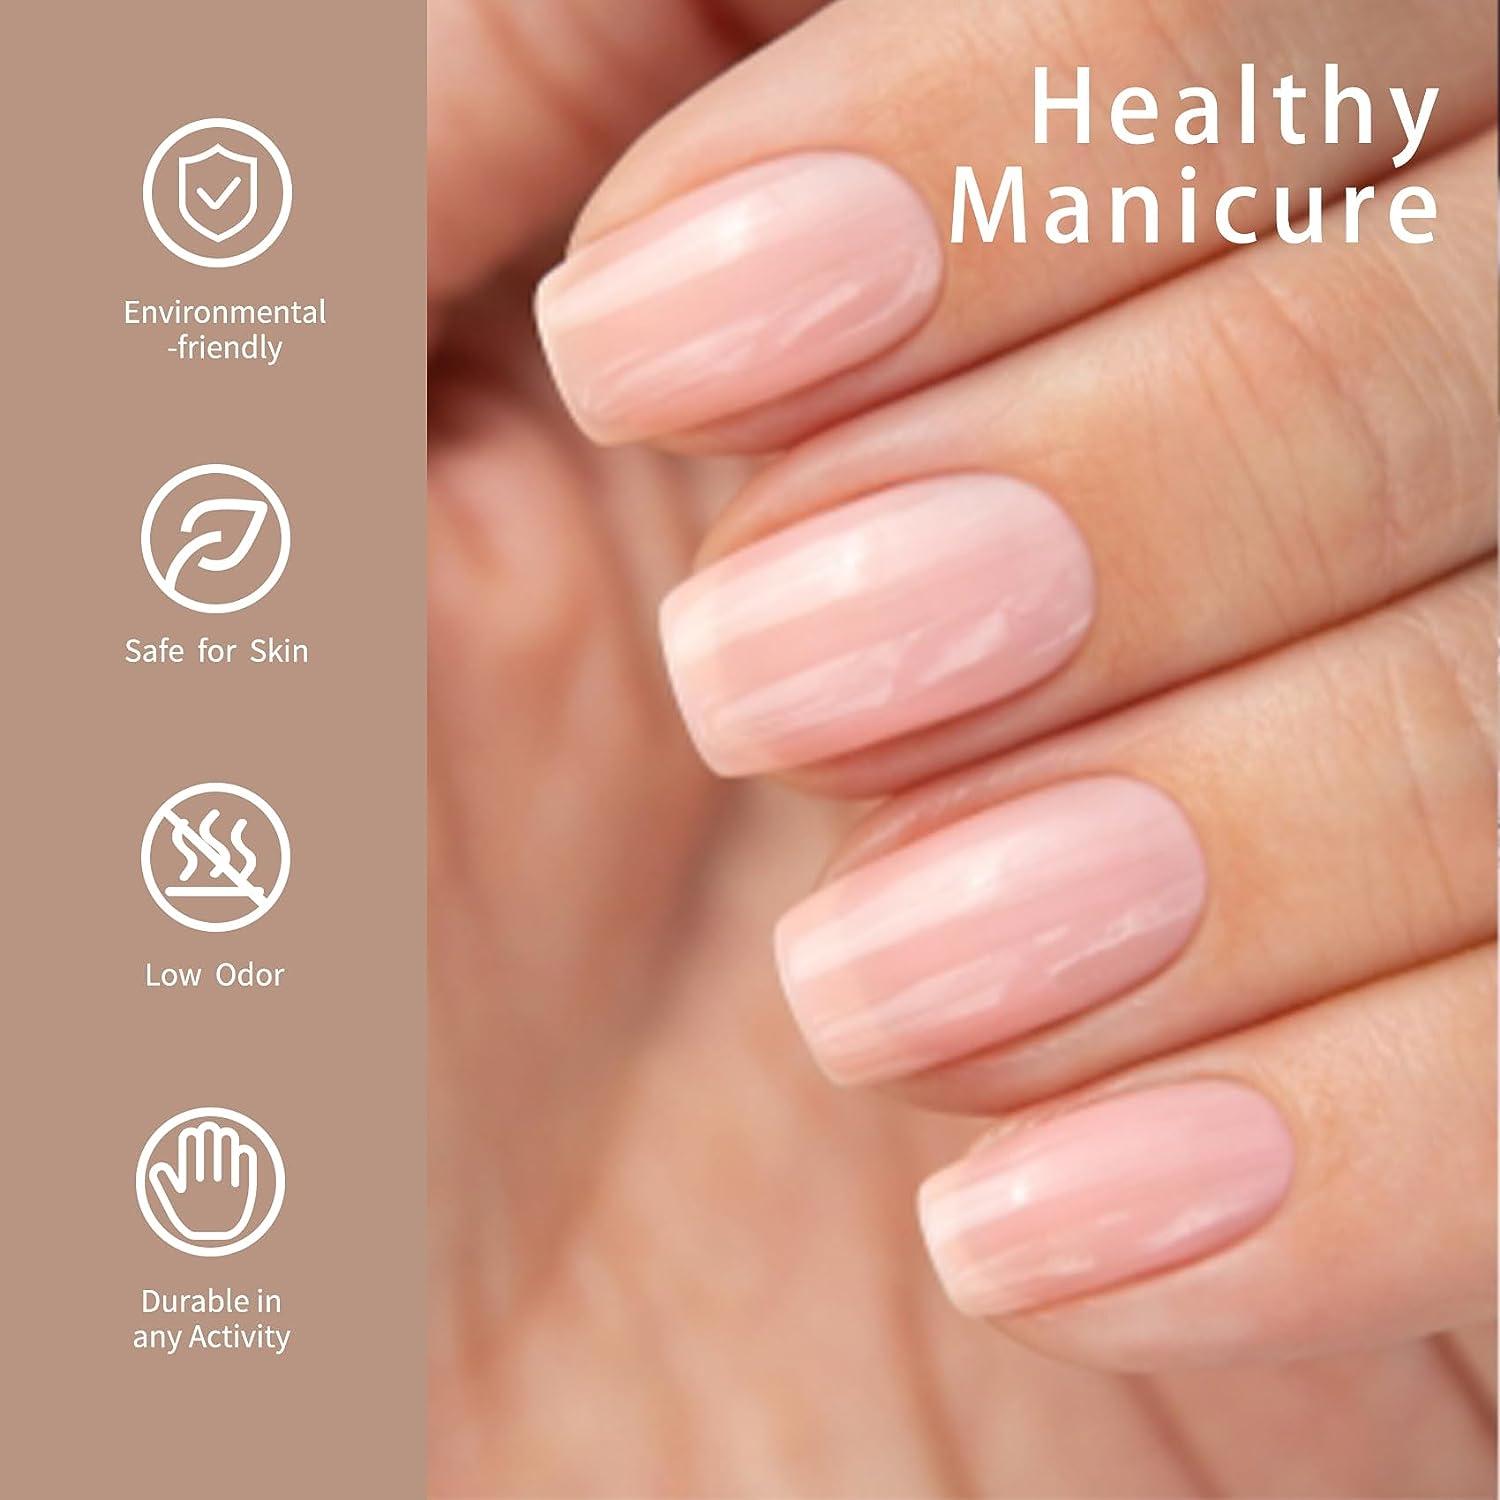 How to use builder gel on natural nails | Nail Polish Direct